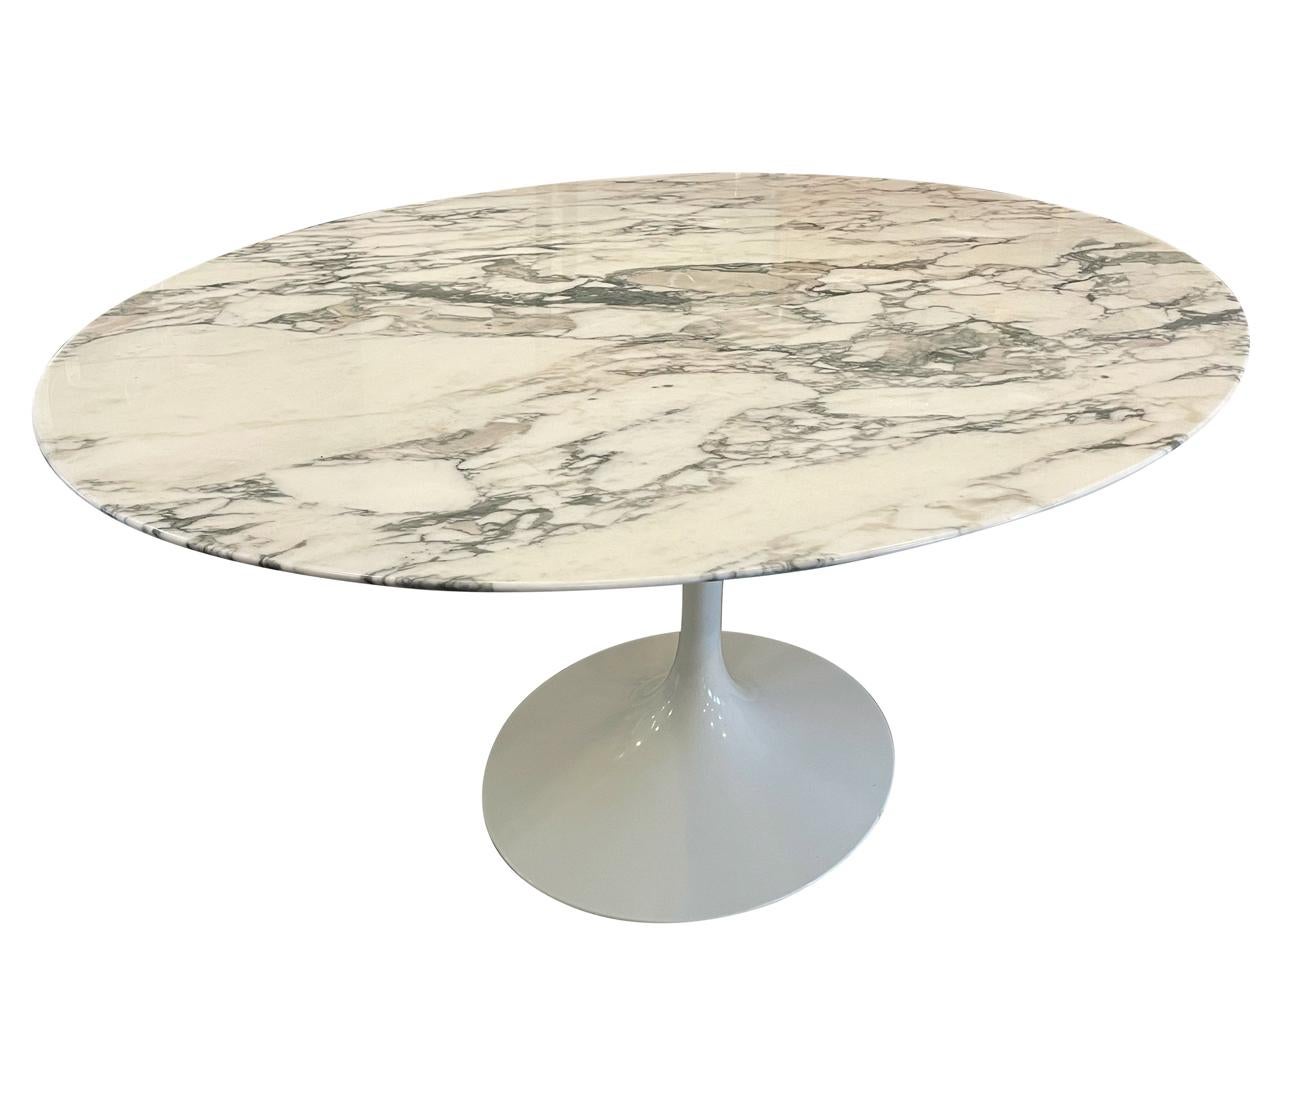 A large and impressive dining table designed by Eero Saarinen and produced by Knoll. This elliptical oval table features a beautiful slab of Arabescato marble on a white tulip base. Signed Eero Saarinen. Very well cared for and ready to use